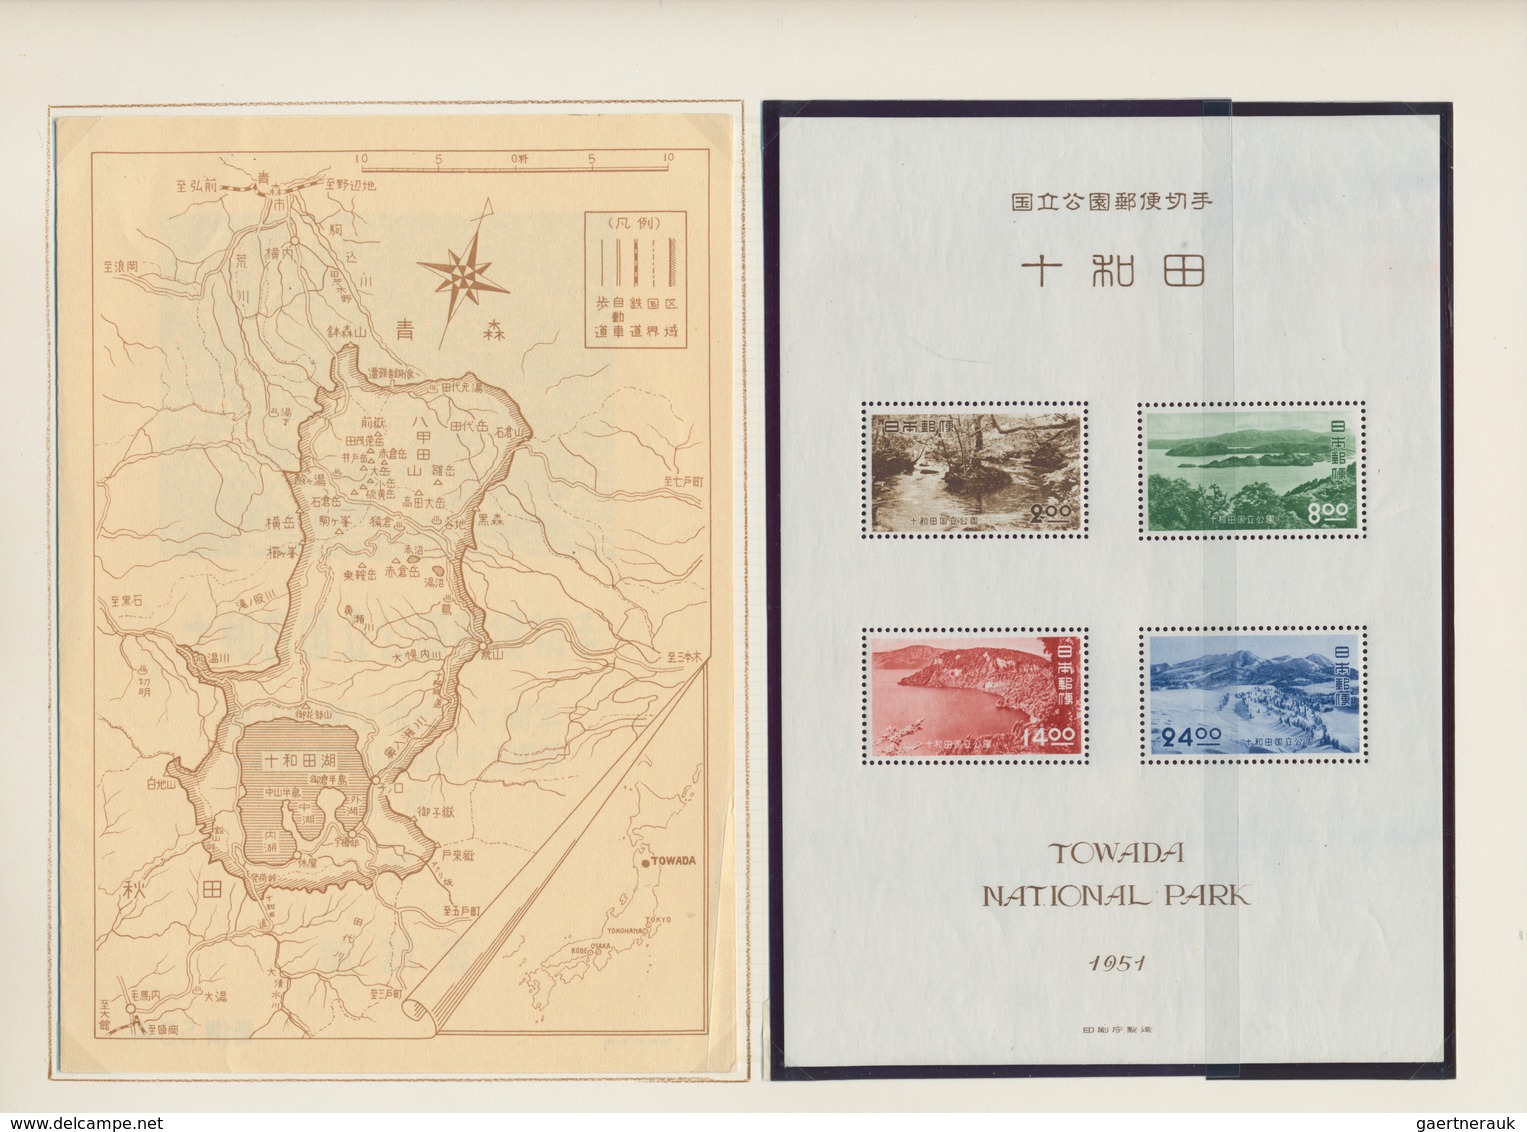 Japan: 1936/72, cpl. collection of National Park and QNP issues inc. all s/s all w. folders, mint ne